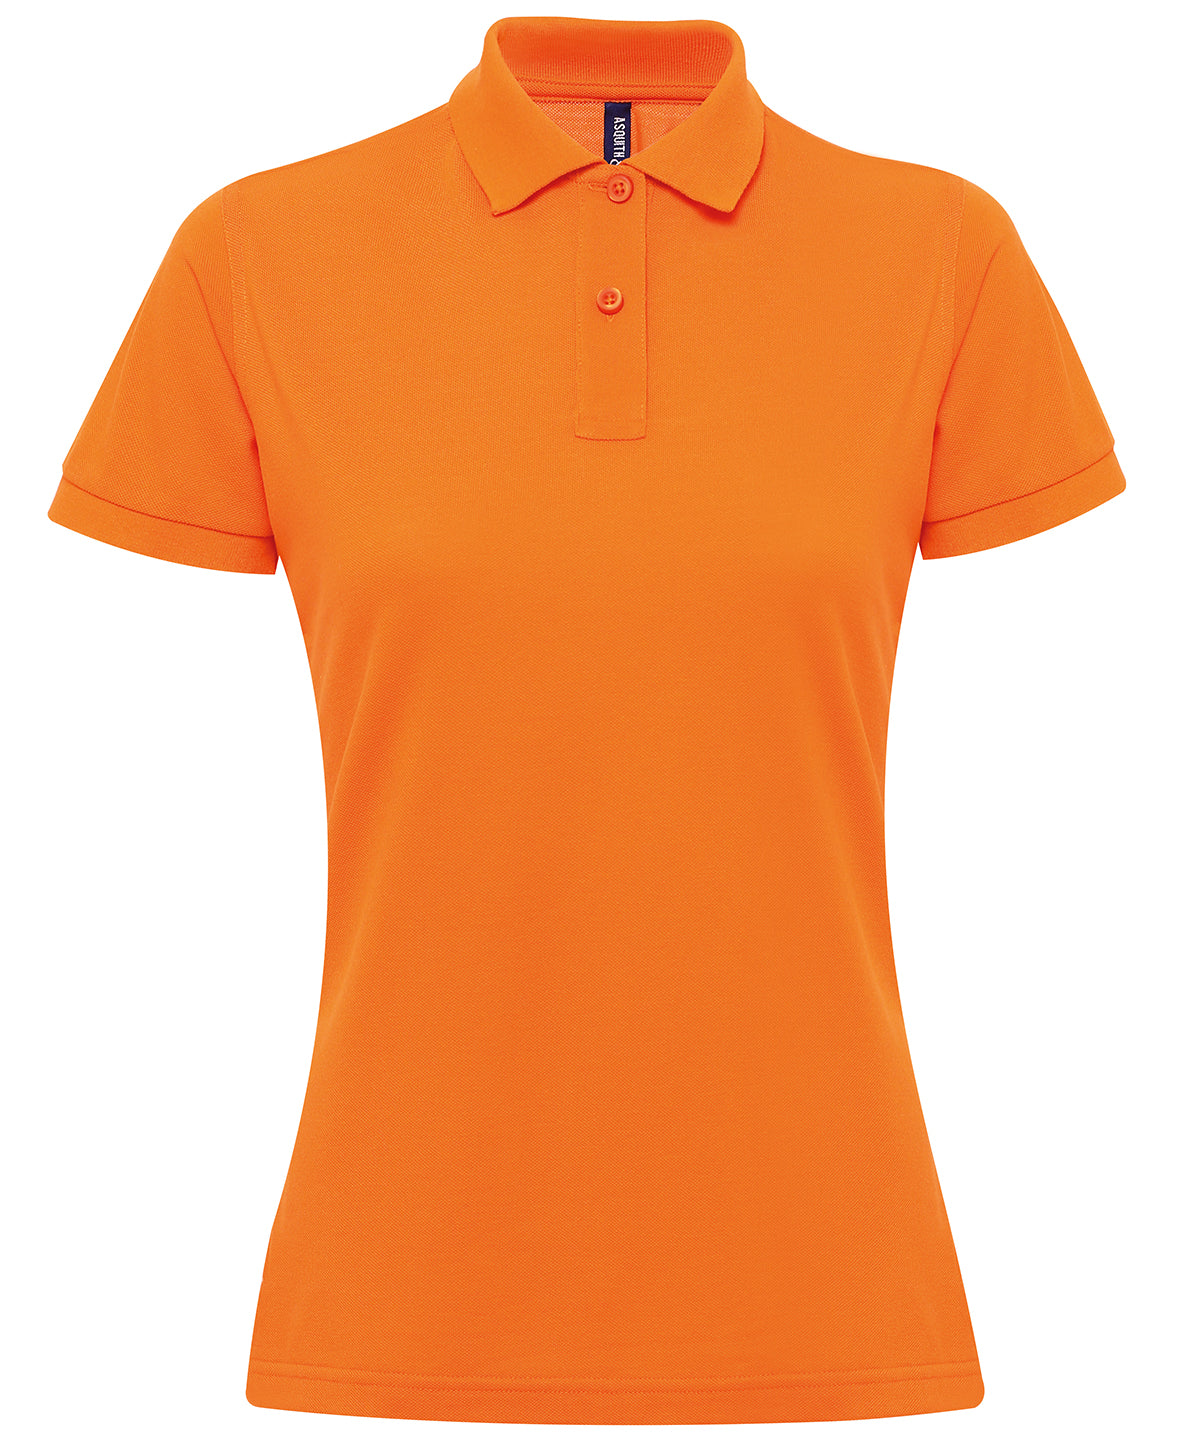 Personalised Polo Shirts - Royal Asquith & Fox Women’s polycotton blend polo